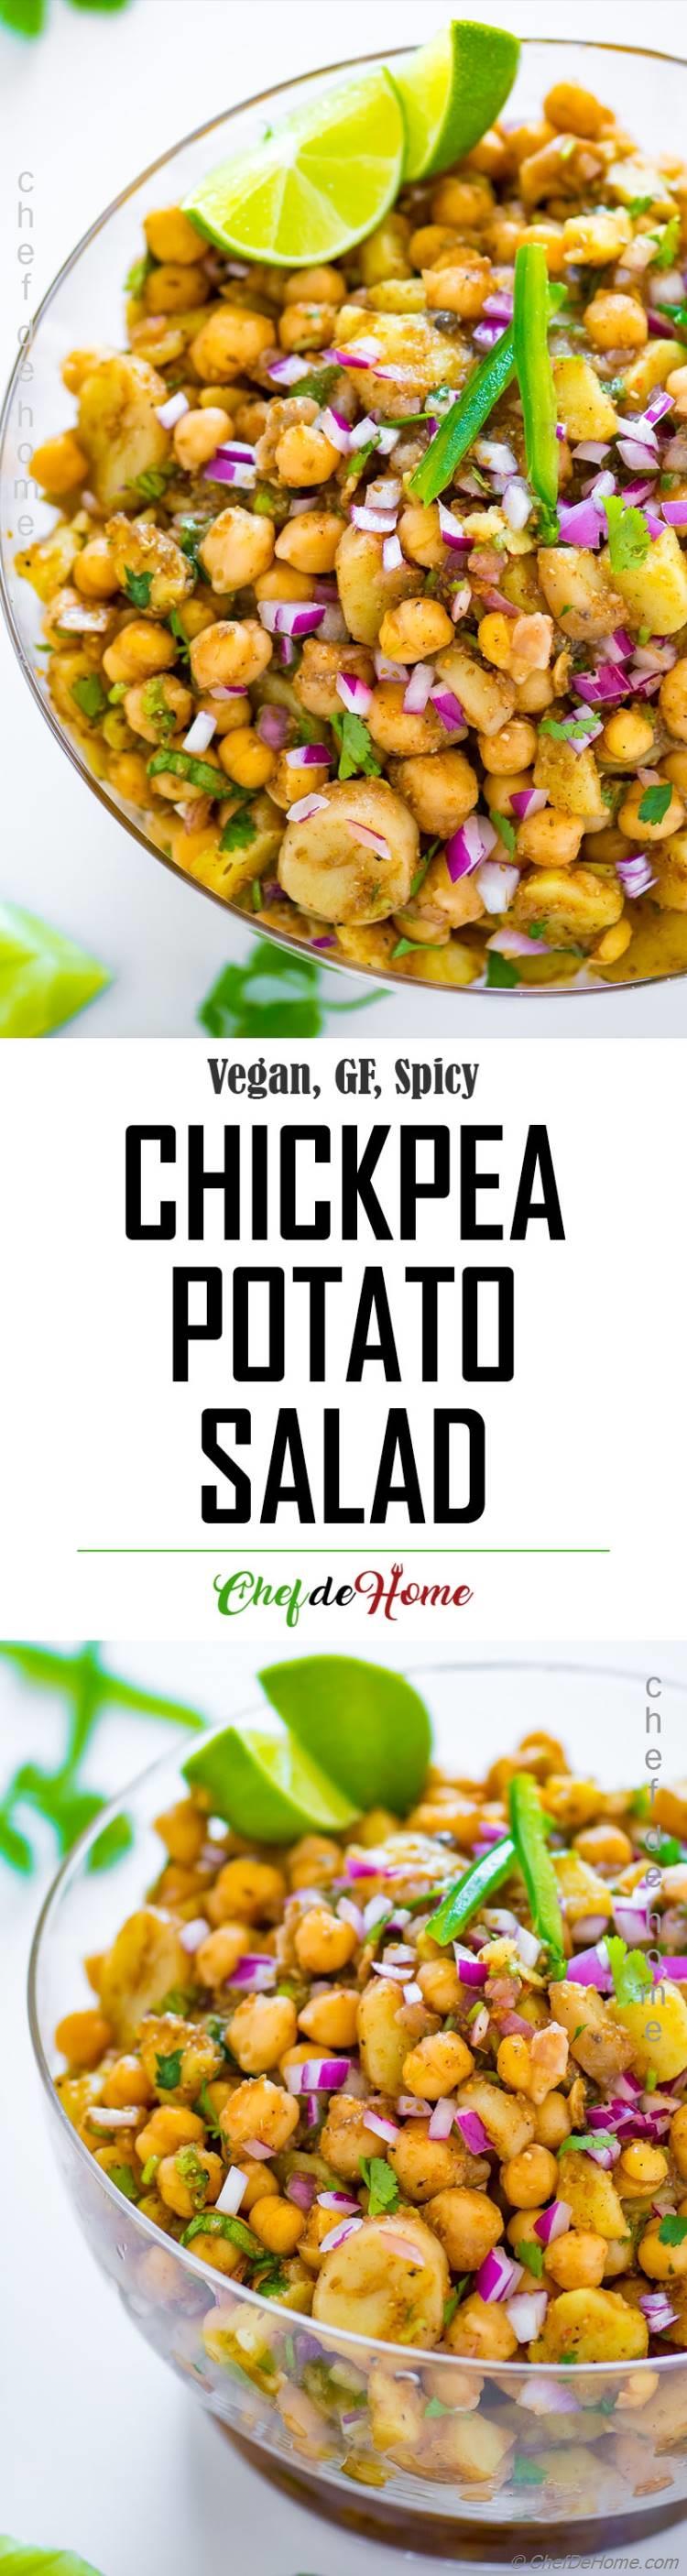 Delicious Vegan and Gluten Free Spicy Chickpea Salad